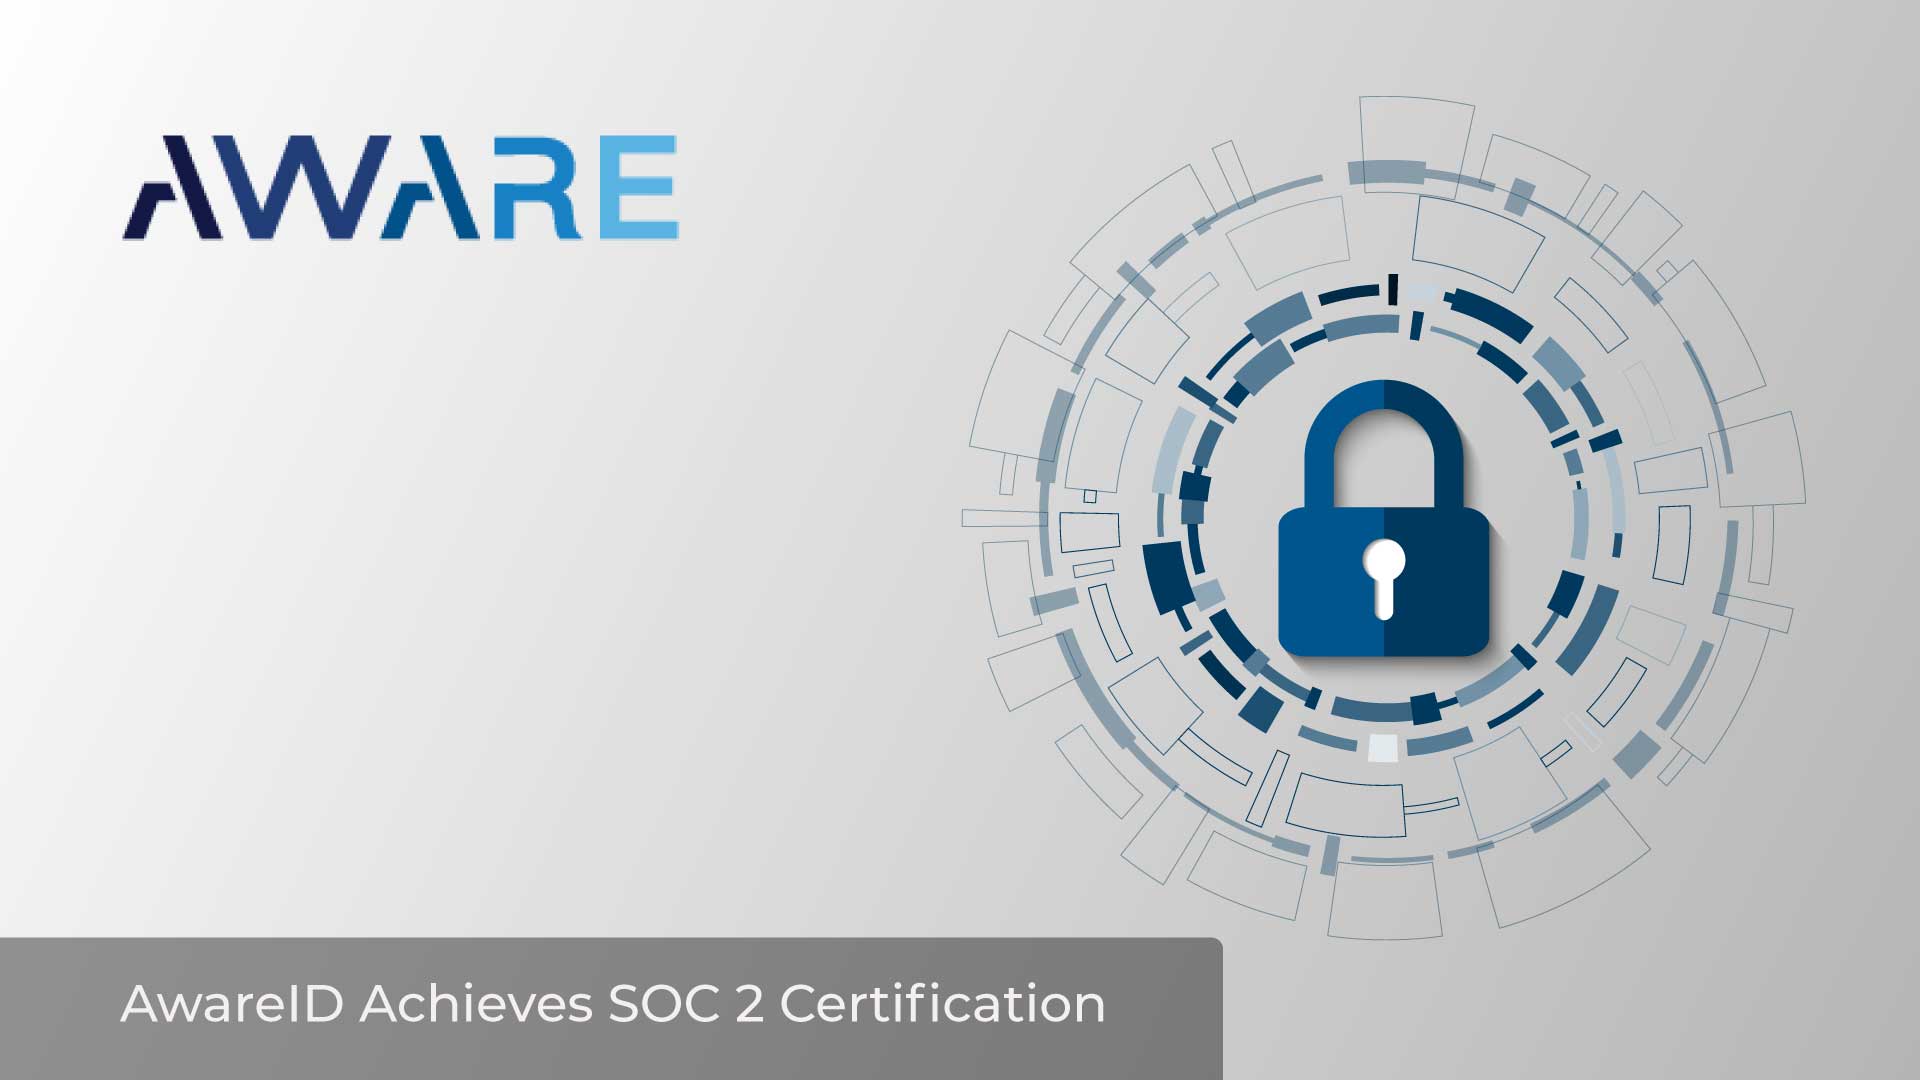 Aware ID Achieves Gold Standard for Security and Data Confidentiality with SOC 2 Certification